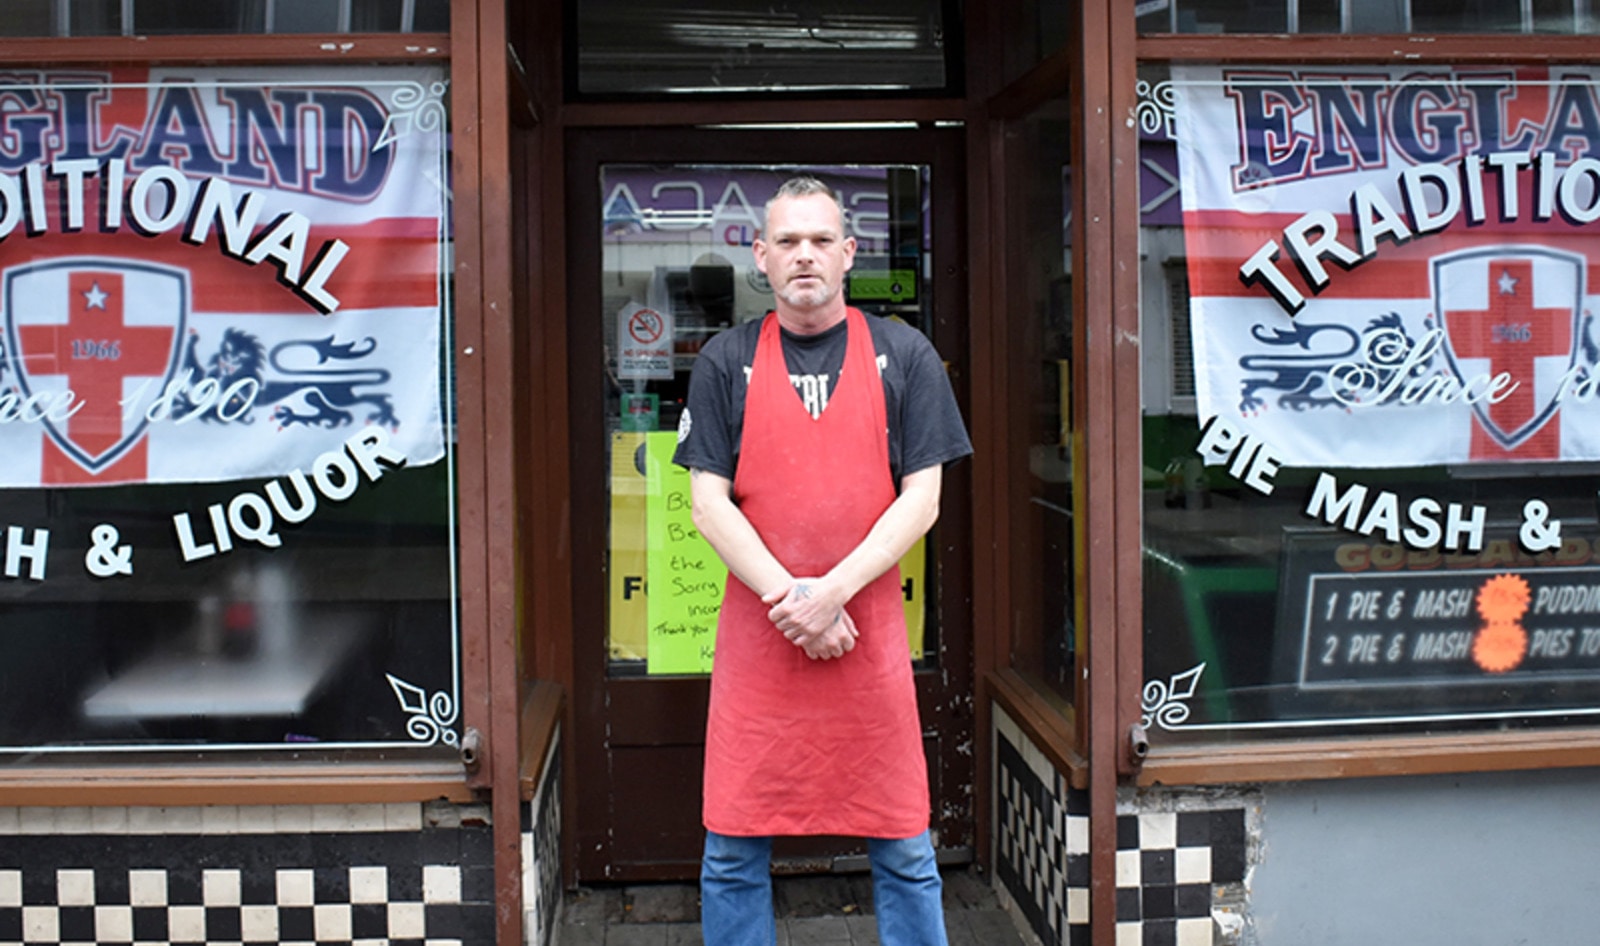 128-Year-Old “Pie and Mash” Shop Closes, Blames It on Vegans